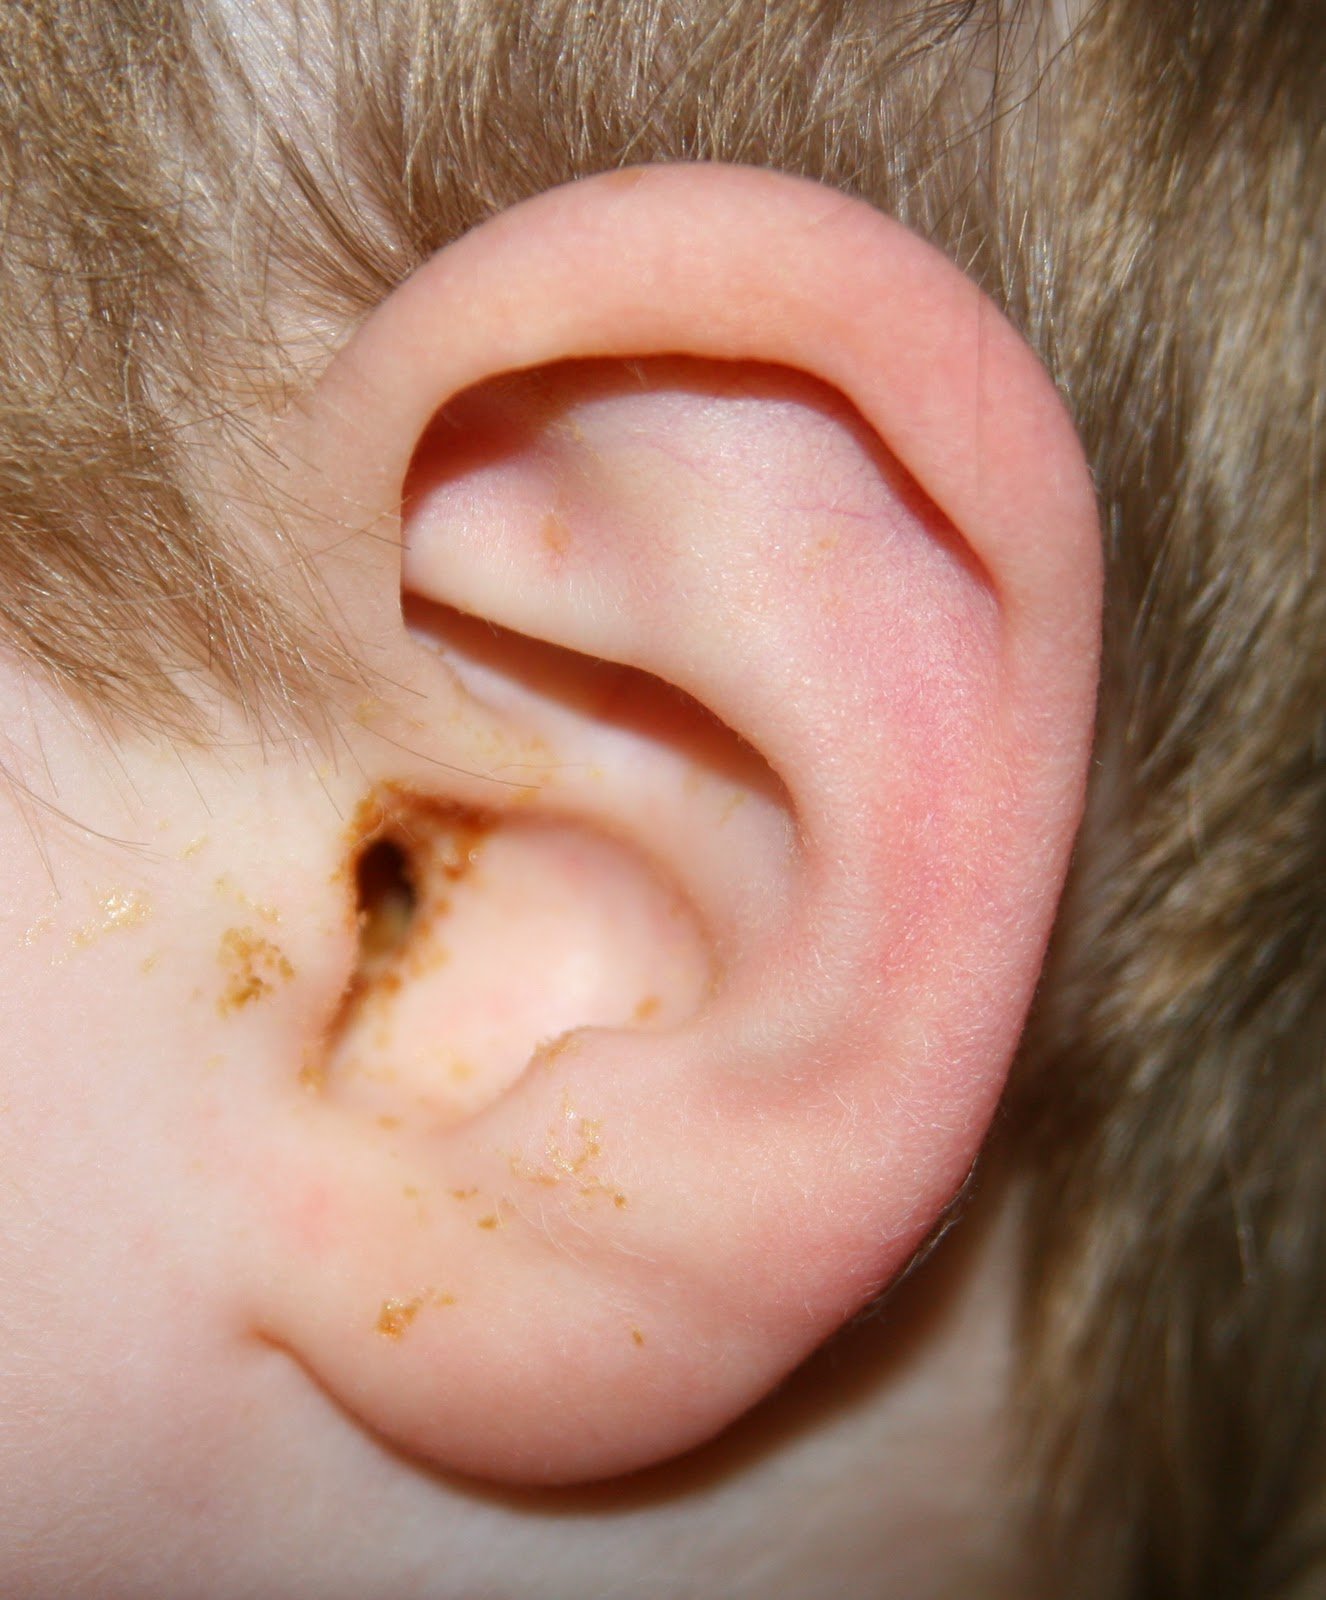 Say What?: Rats (Another Ear Infection)